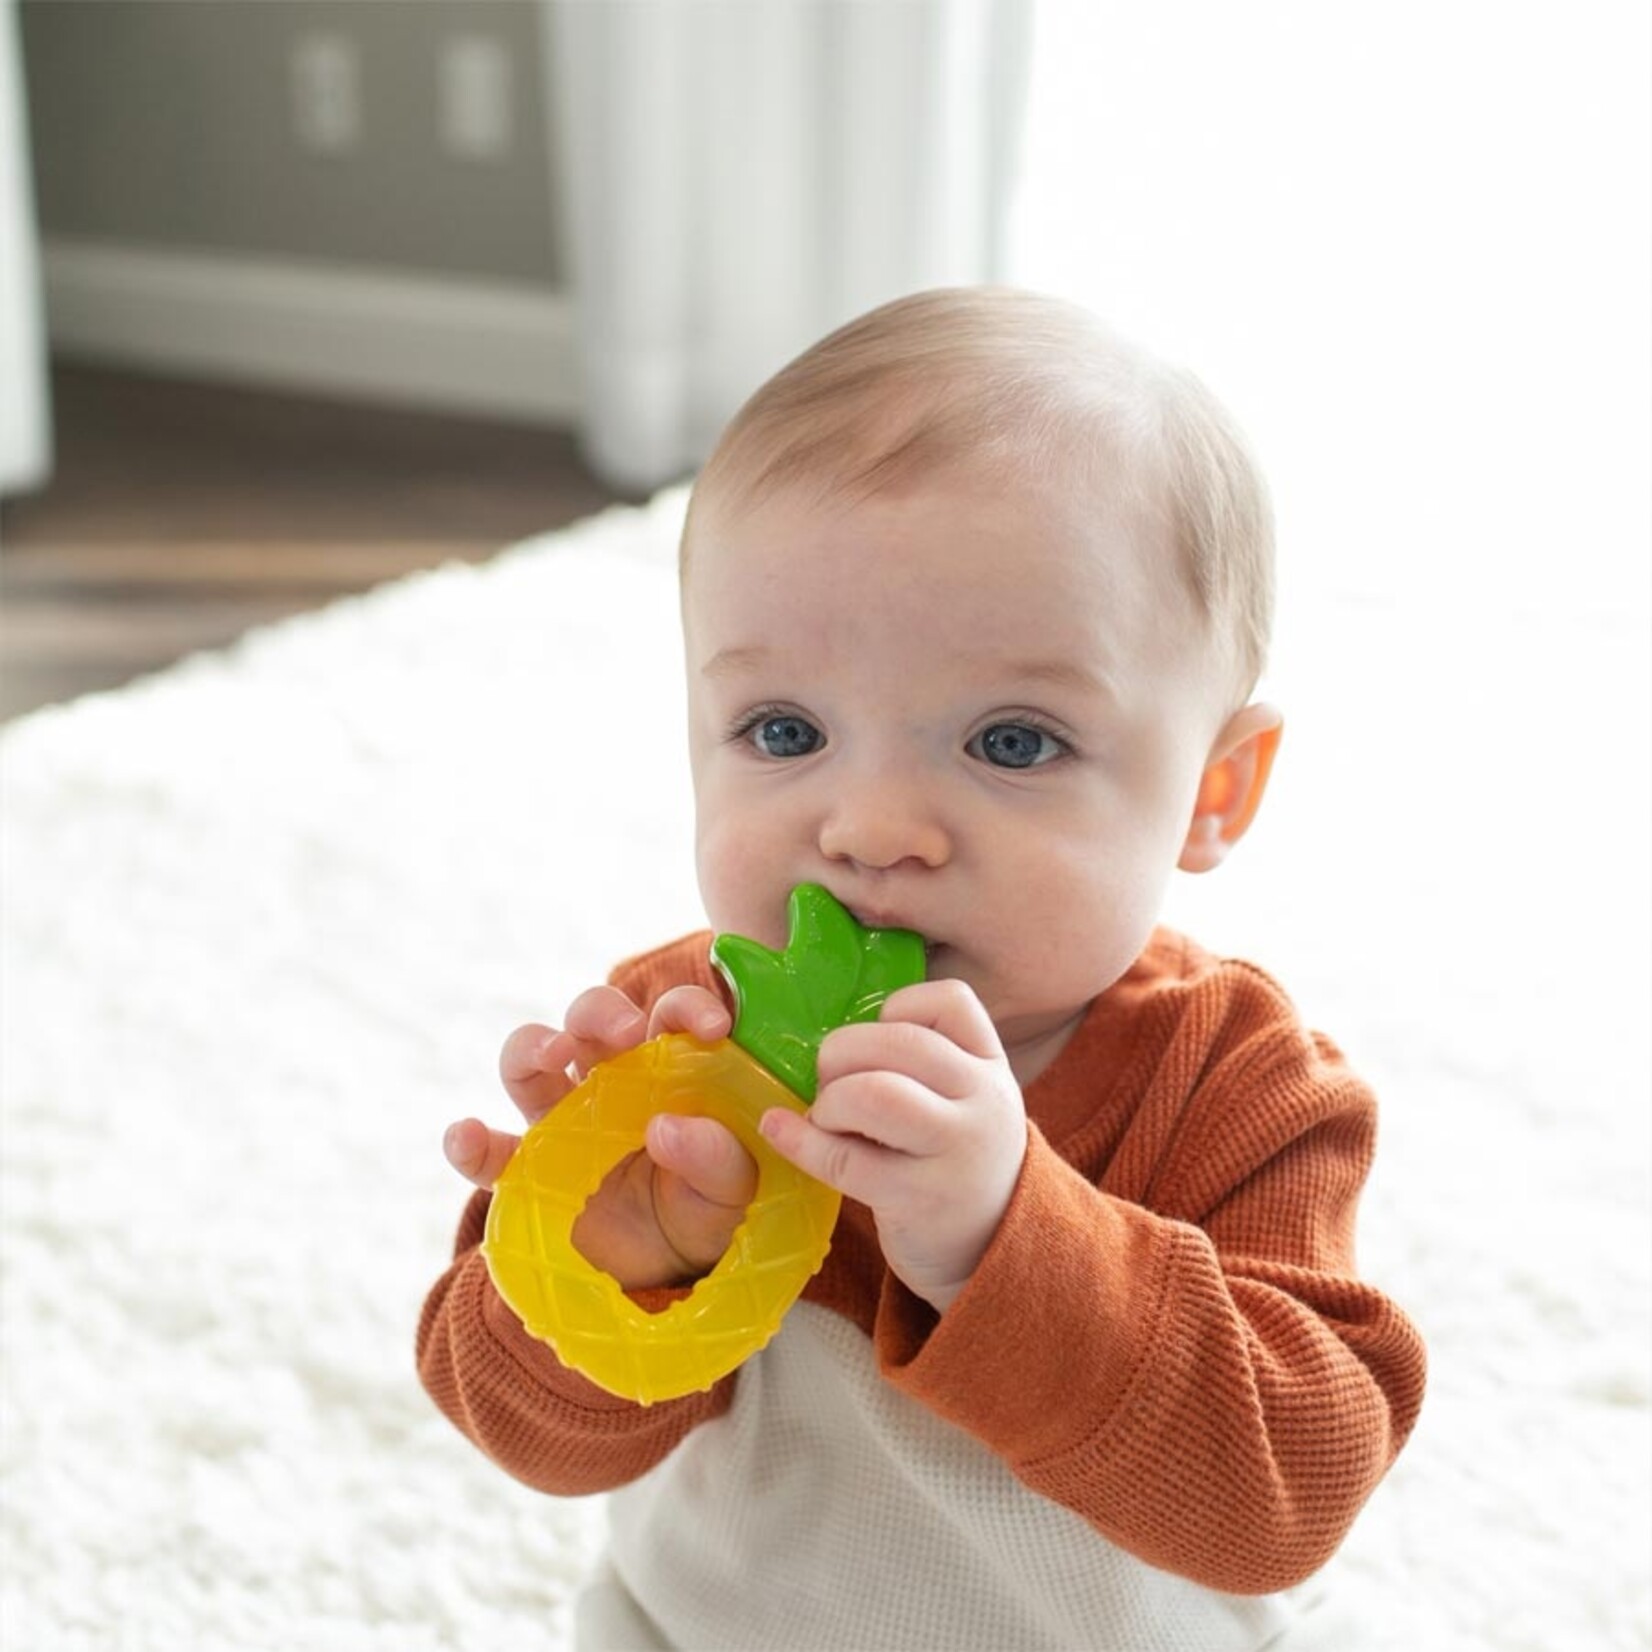 Dr Browns DR BROWNS AQUACOOL WATER-FILLED TEETHERS 2PK APPLE/PINEAPPLE